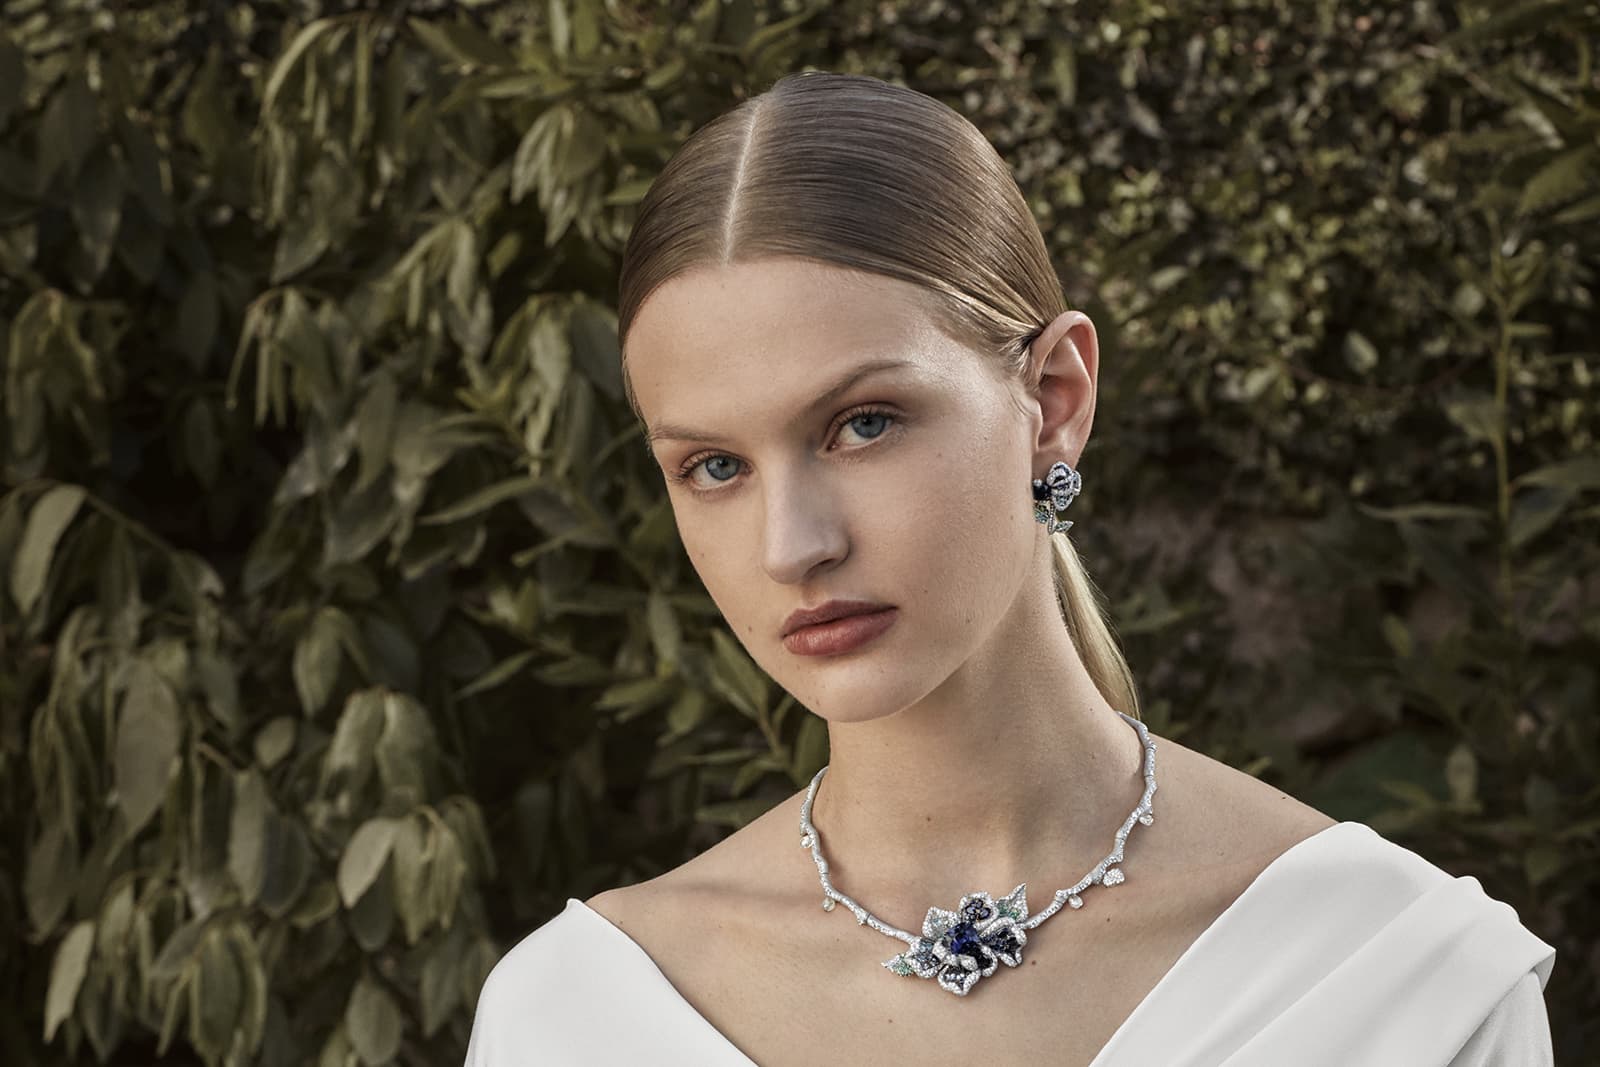 Floral inspired necklace and earrings from the new Dior Print High Jewellery collection